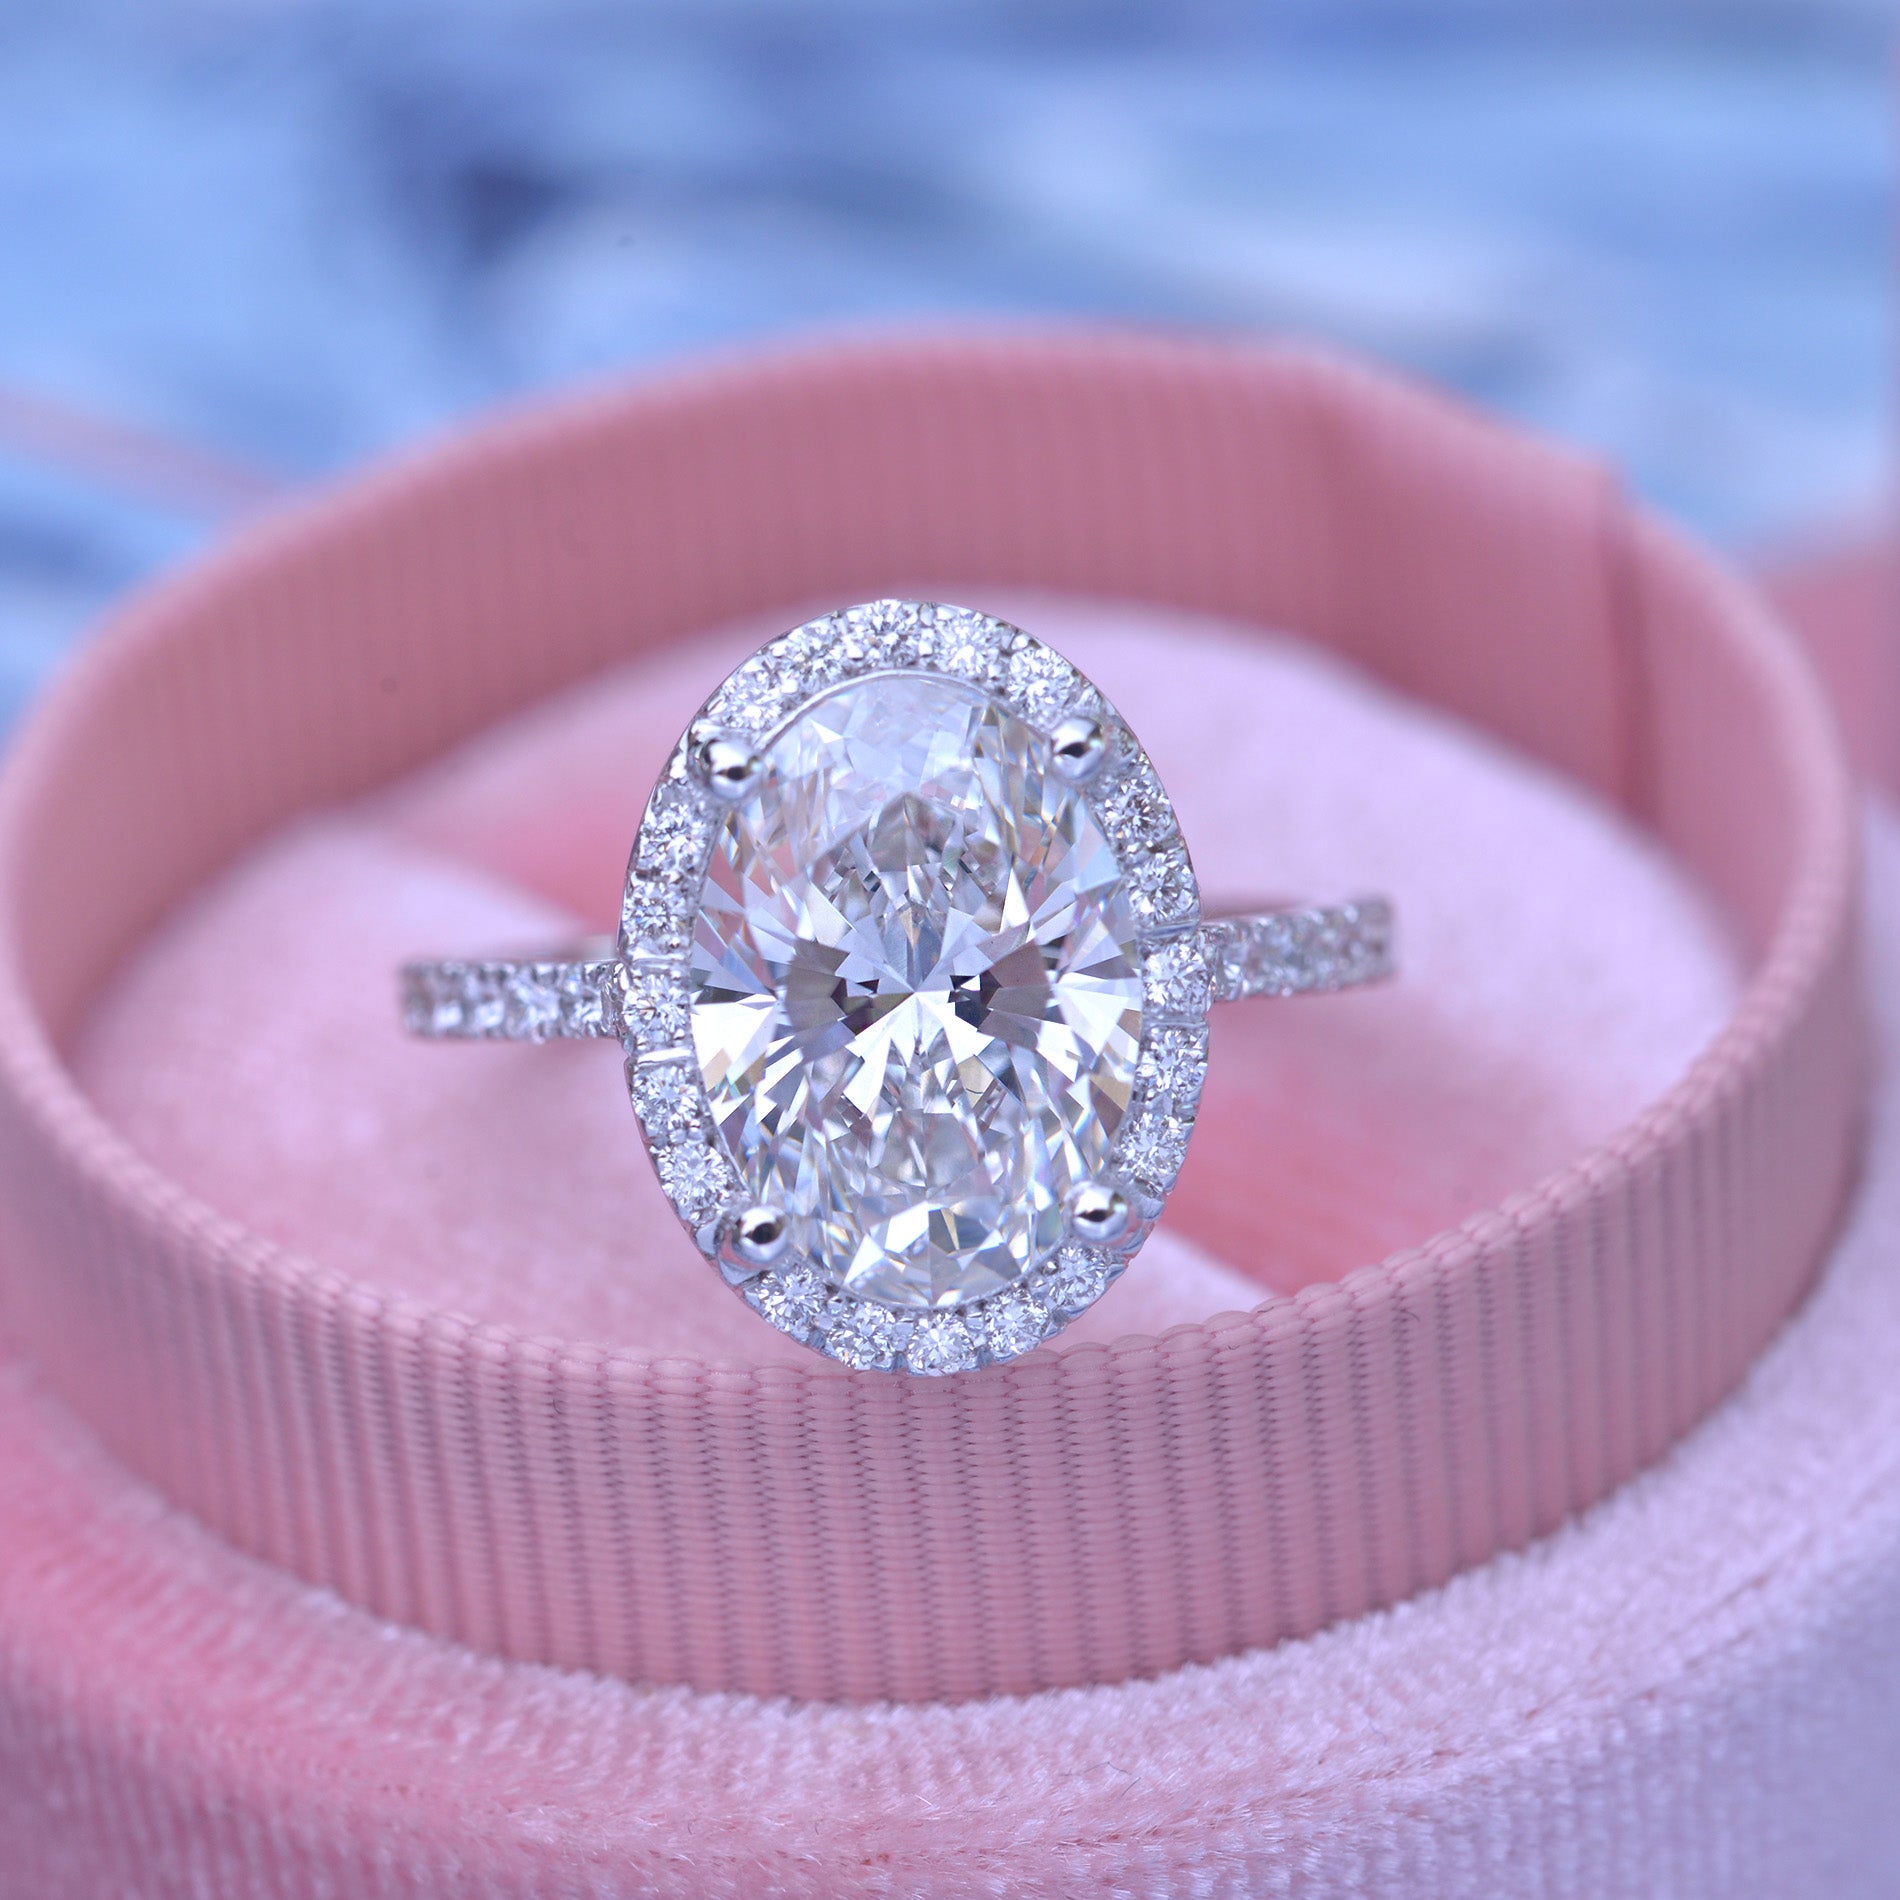 Classic Oval Halo - Lab Grown Diamond Engagement Ring 2ct, 2.5ct 3ct. 11x9mm 4ct Moissanite / 14K Rose Gold / Size 4 to 10 Please Message US for